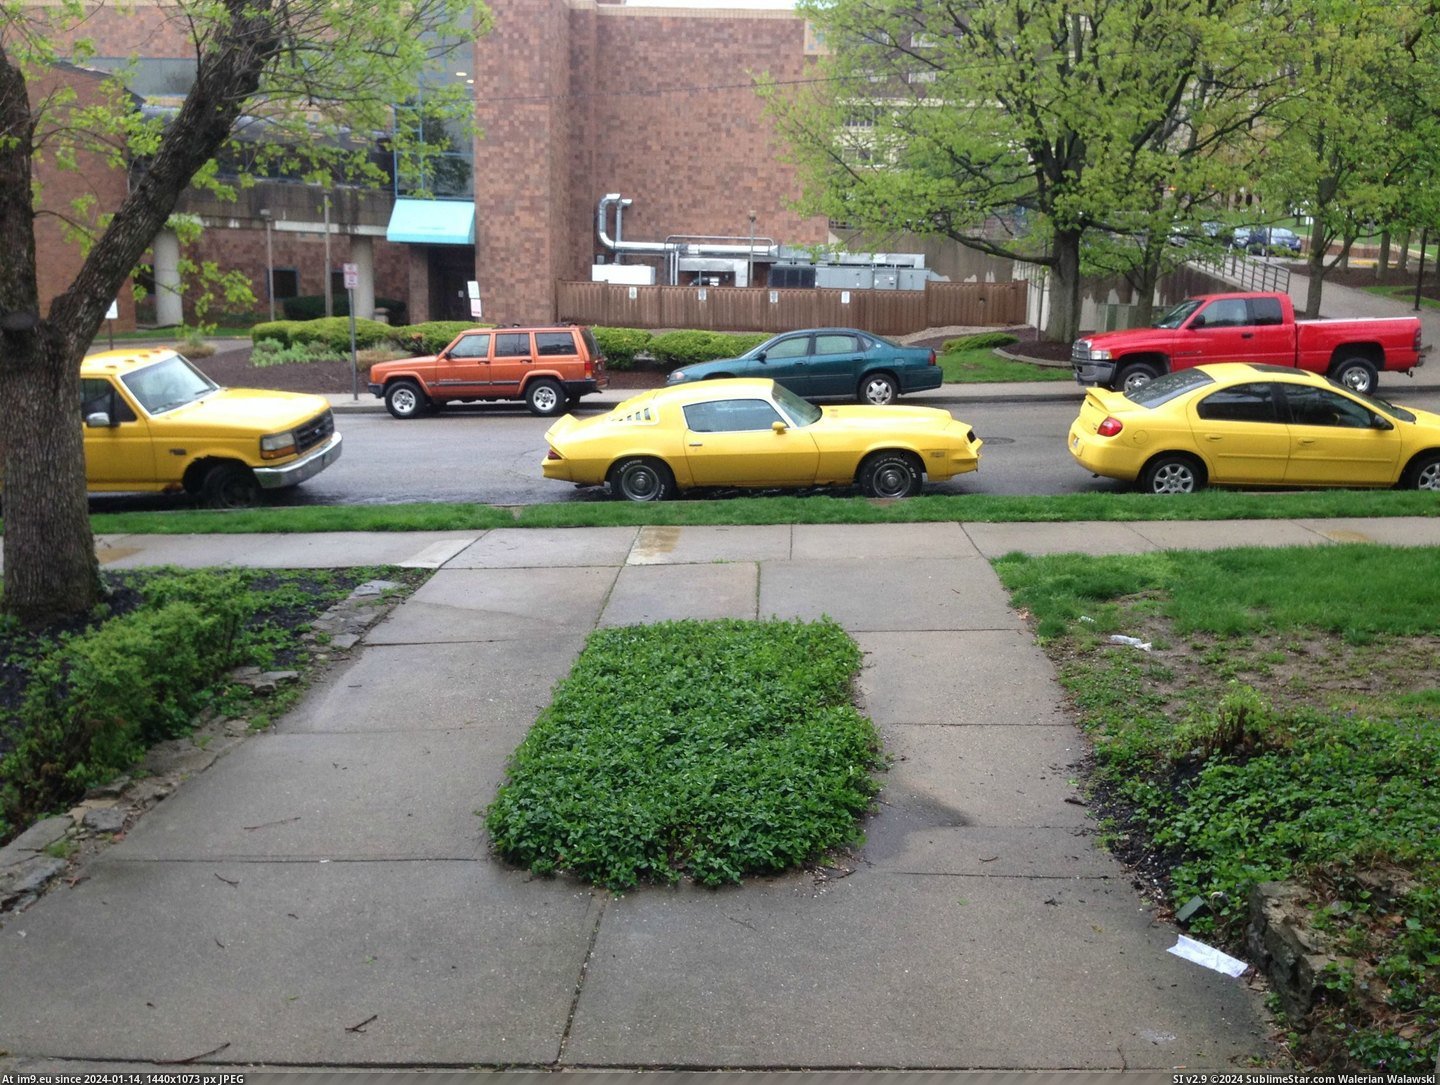 #Morning #Apartment #Row #Parked #Yellow #Cars [Mildlyinteresting] These 3 yellow cars were parked in a row outside my apartment this morning Pic. (Obraz z album My r/MILDLYINTERESTING favs))